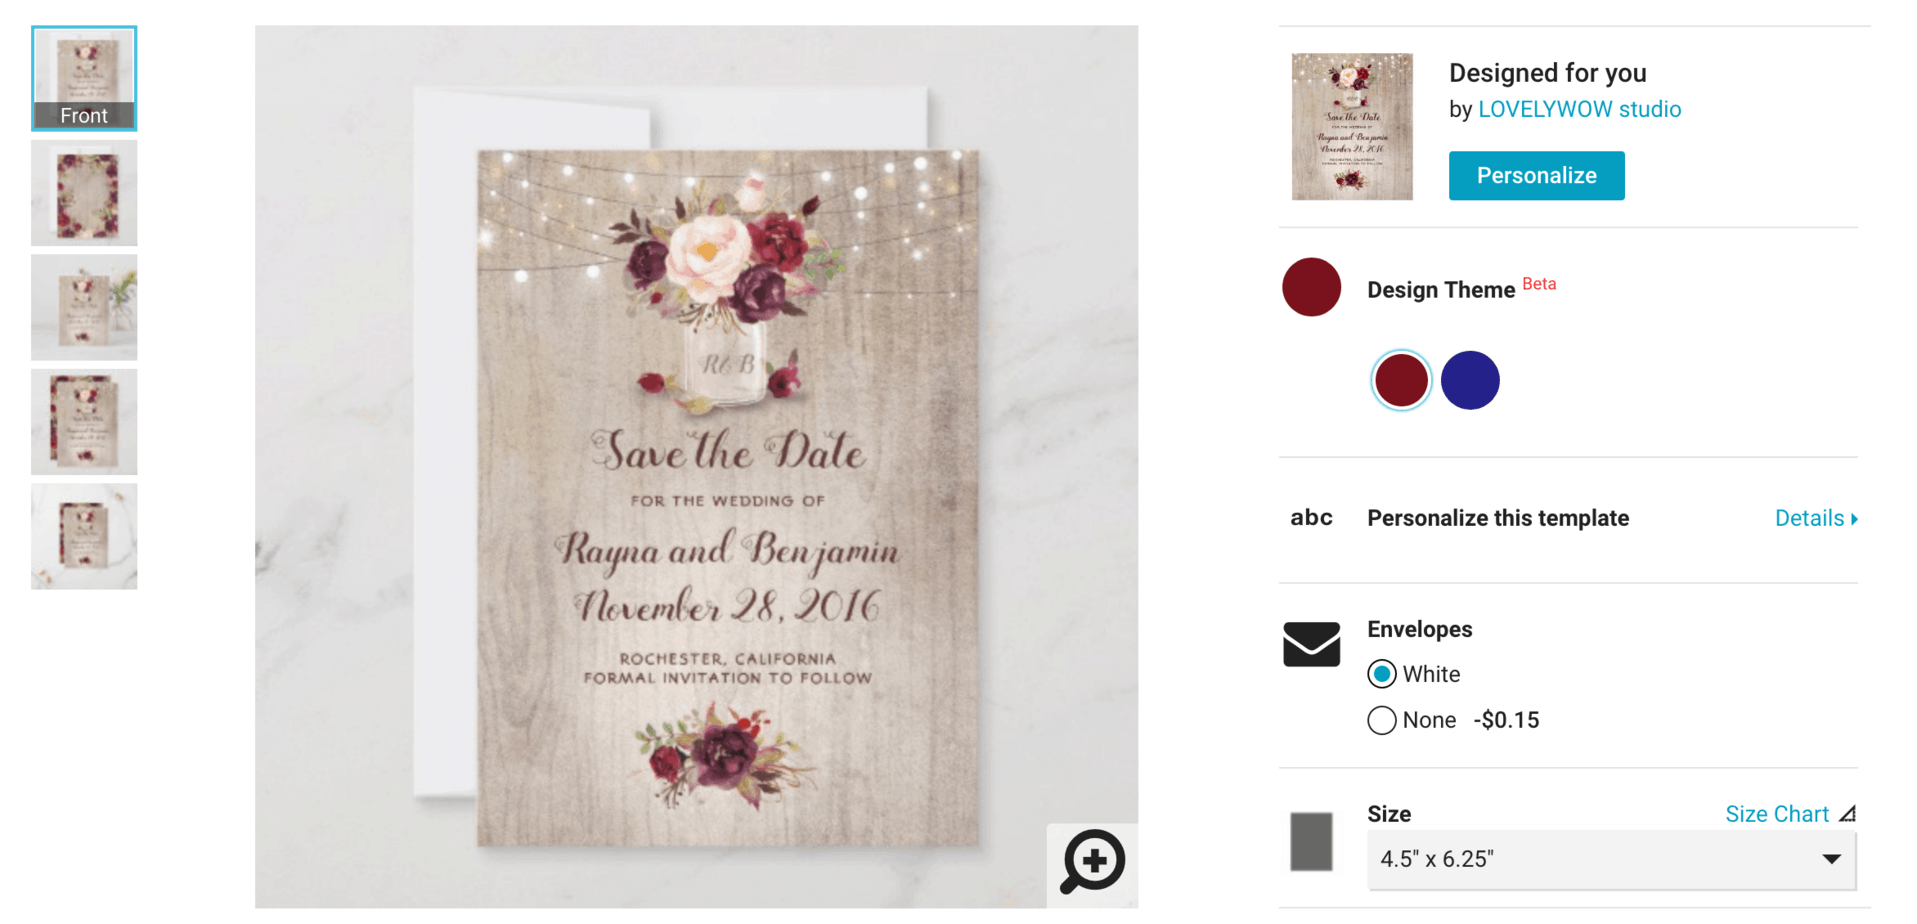 This design theme option shows the burgundy colored graphic version of this save the date